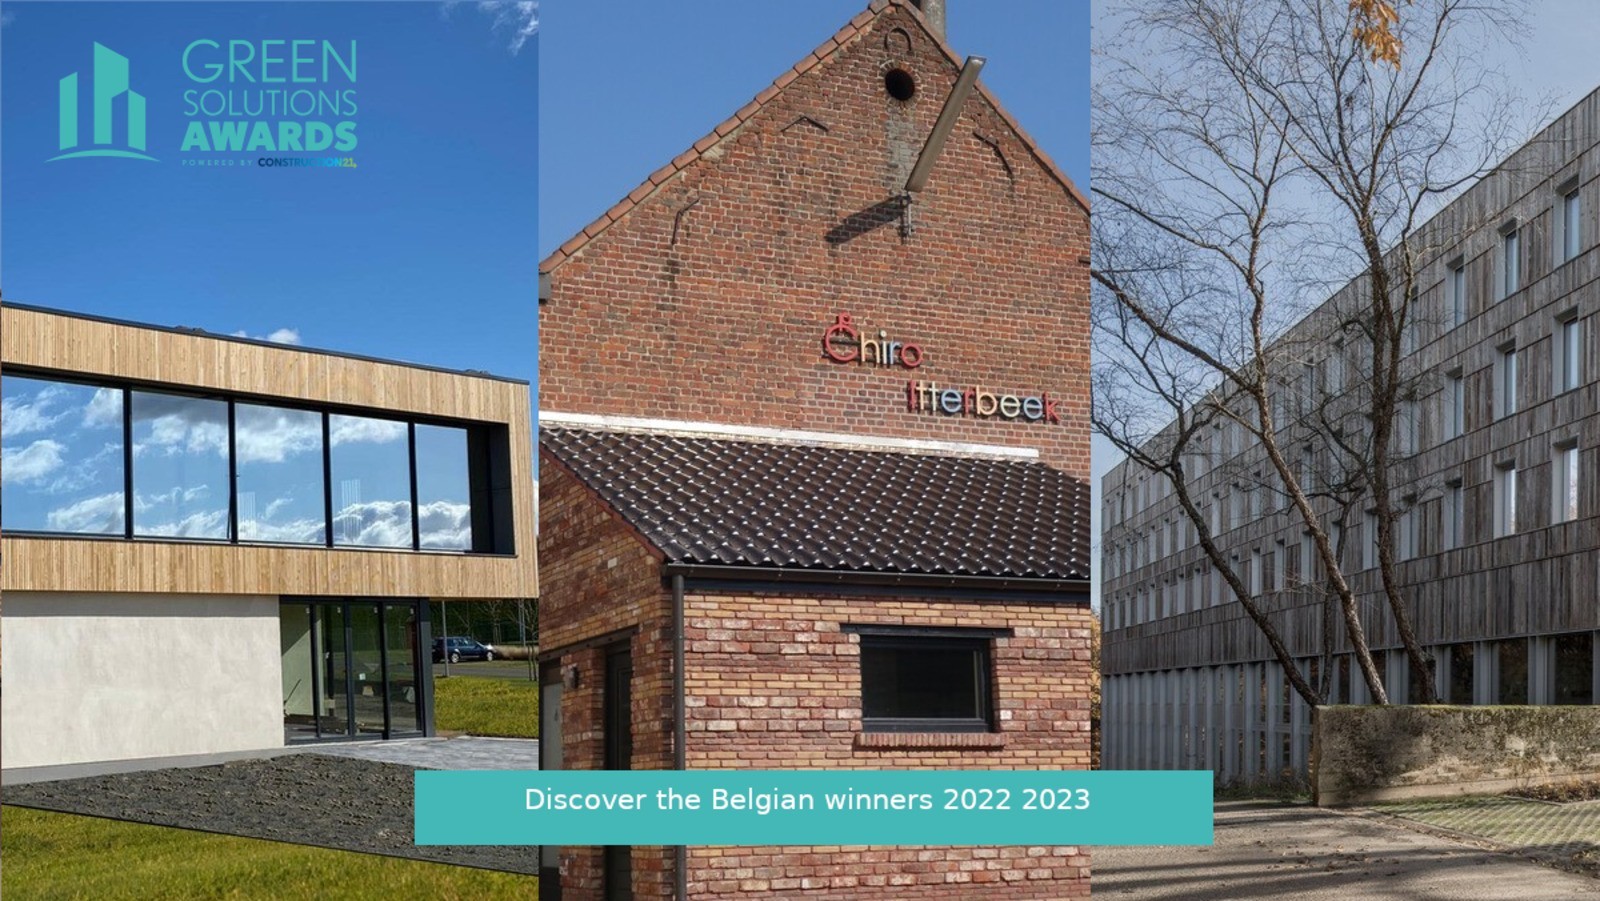 Green Solutions Awards 2022 2023: discover the Belgian winners